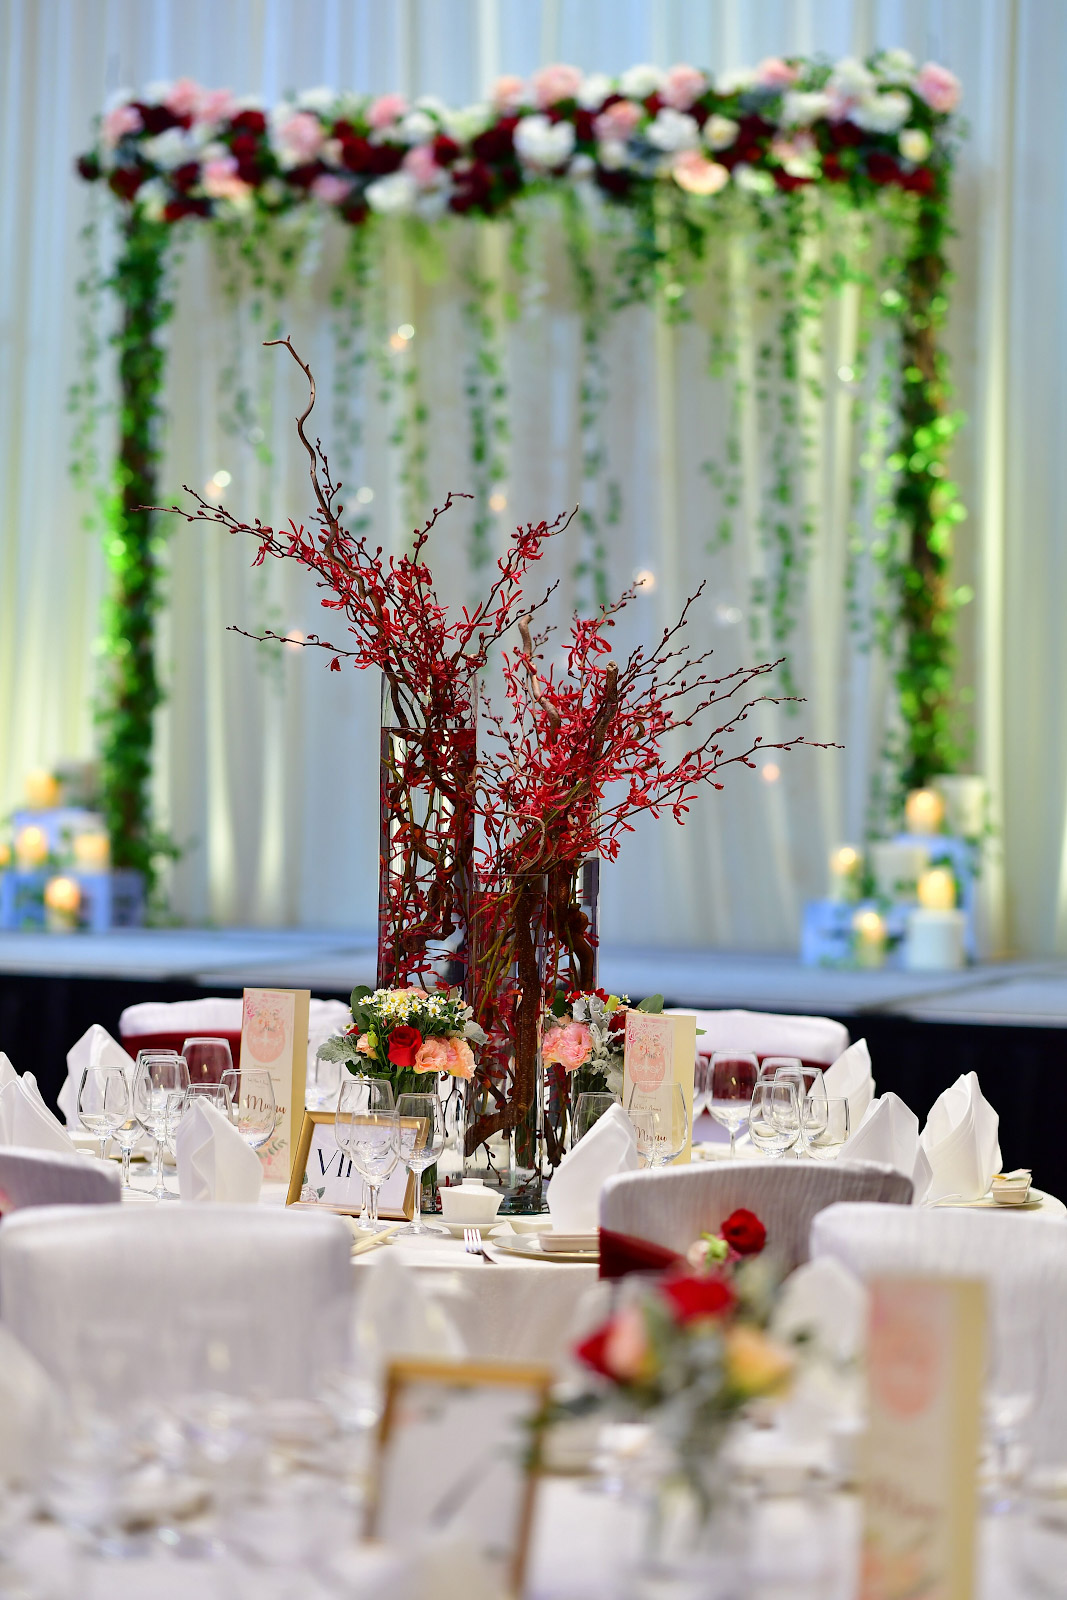 Sheraton Towers Singapore: Everything You Need for Your Dream Wedding